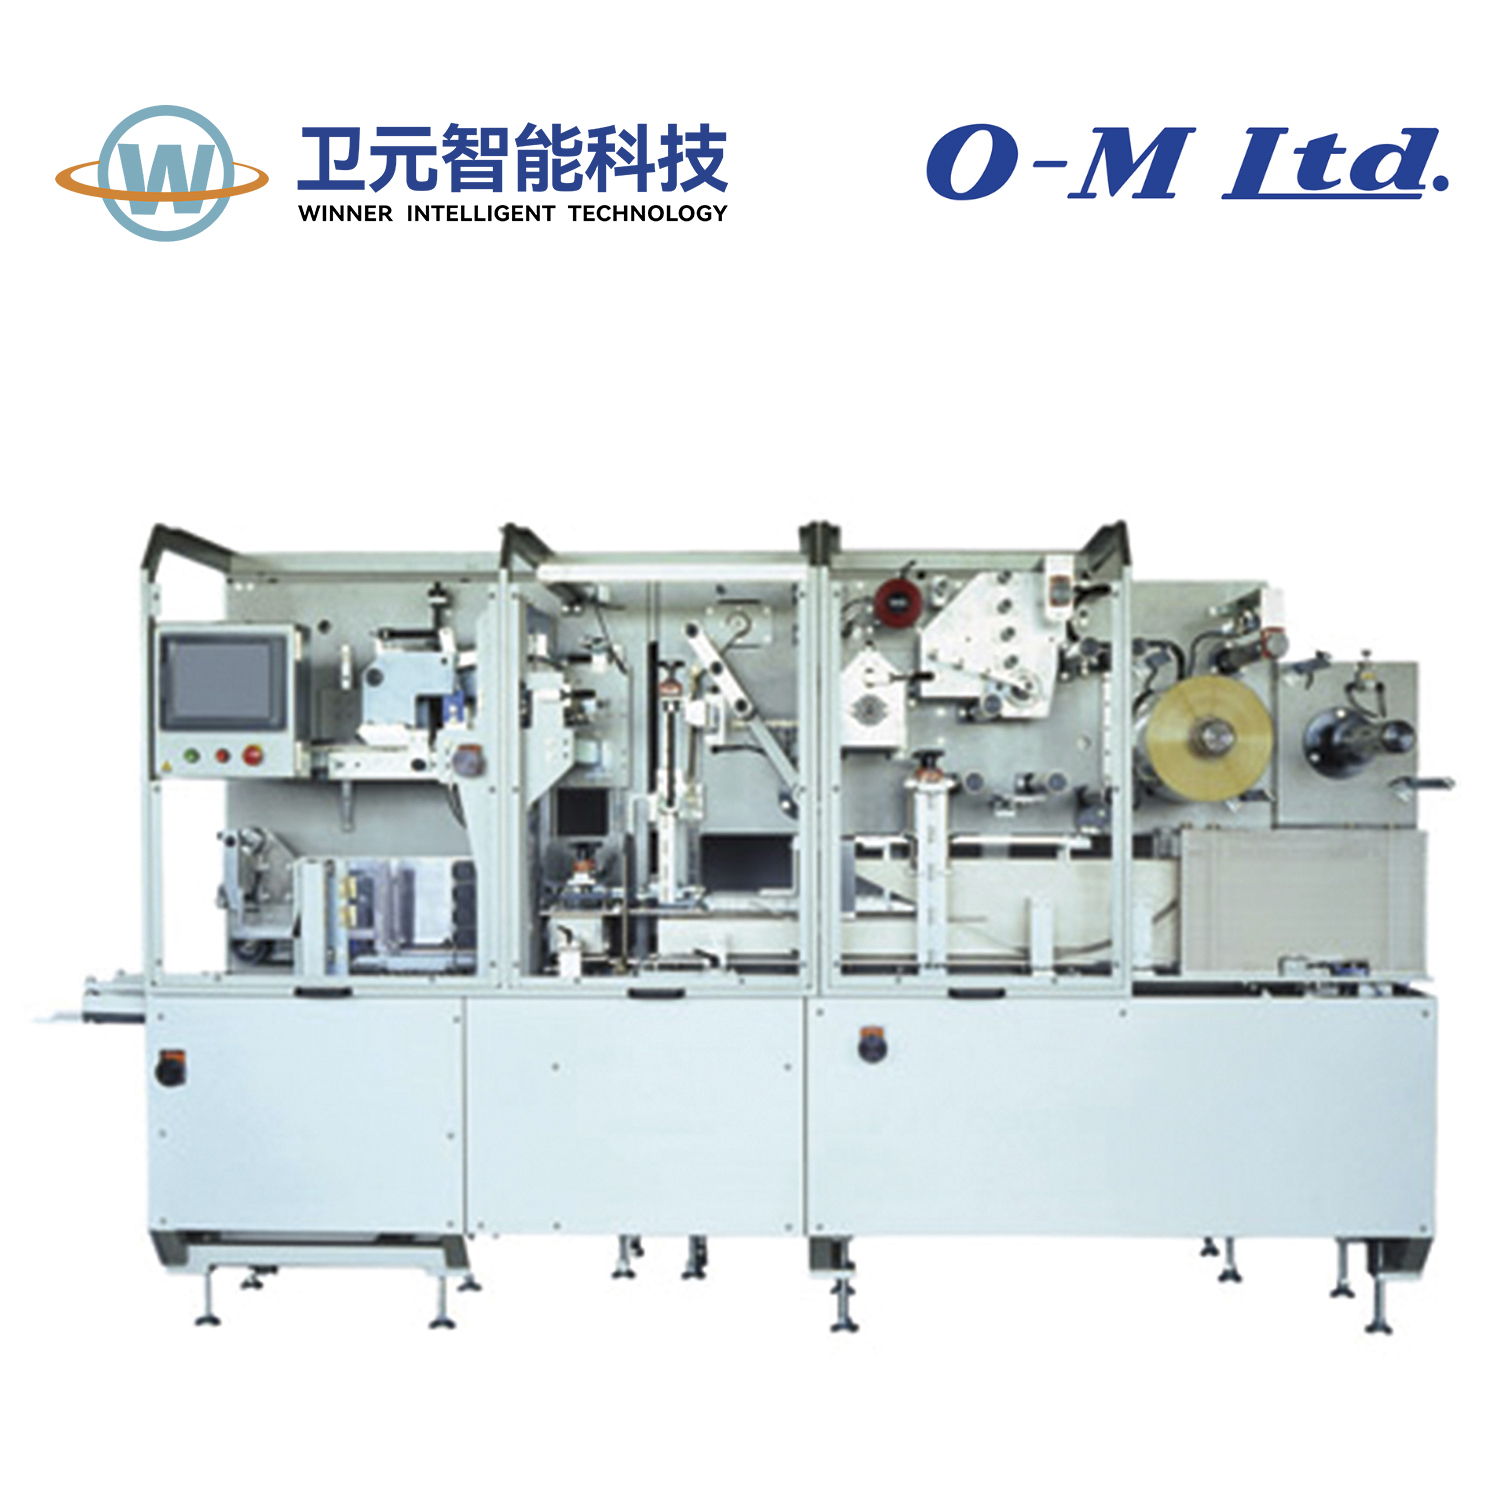 O-MM Film Over-Wrapping Machine